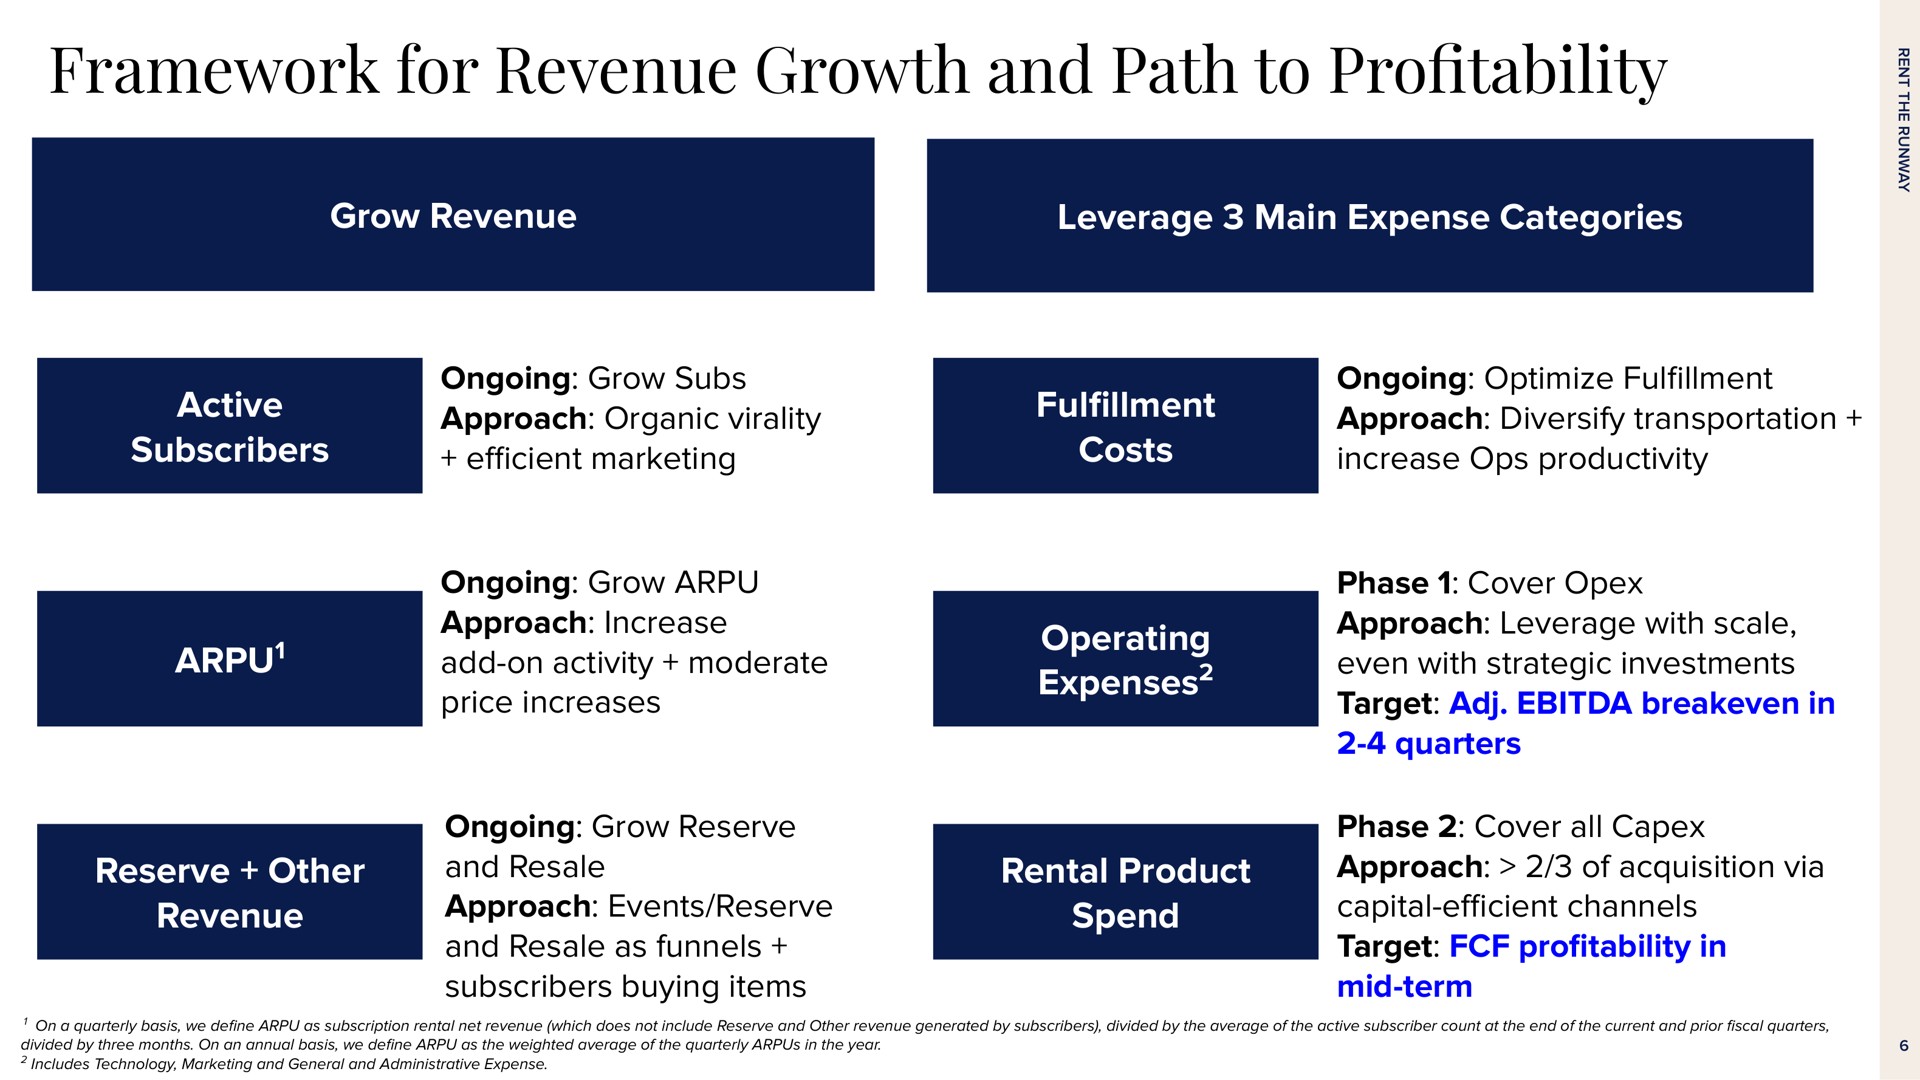 framework for revenue growth and path to pro grow revenue leverage main expense categories active subscribers ongoing grow subs approach organic marketing costs ongoing optimize approach diversify transportation increase productivity ongoing grow approach increase add on activity moderate price increases operating expenses reserve other revenue ongoing grow reserve and resale approach events reserve and resale as funnels subscribers buying items rental product spend phase cover approach leverage with scale even with strategic investments target in quarters phase cover all approach of acquisition via capital channels target pro in mid term profitability sets atom | Rent The Runway